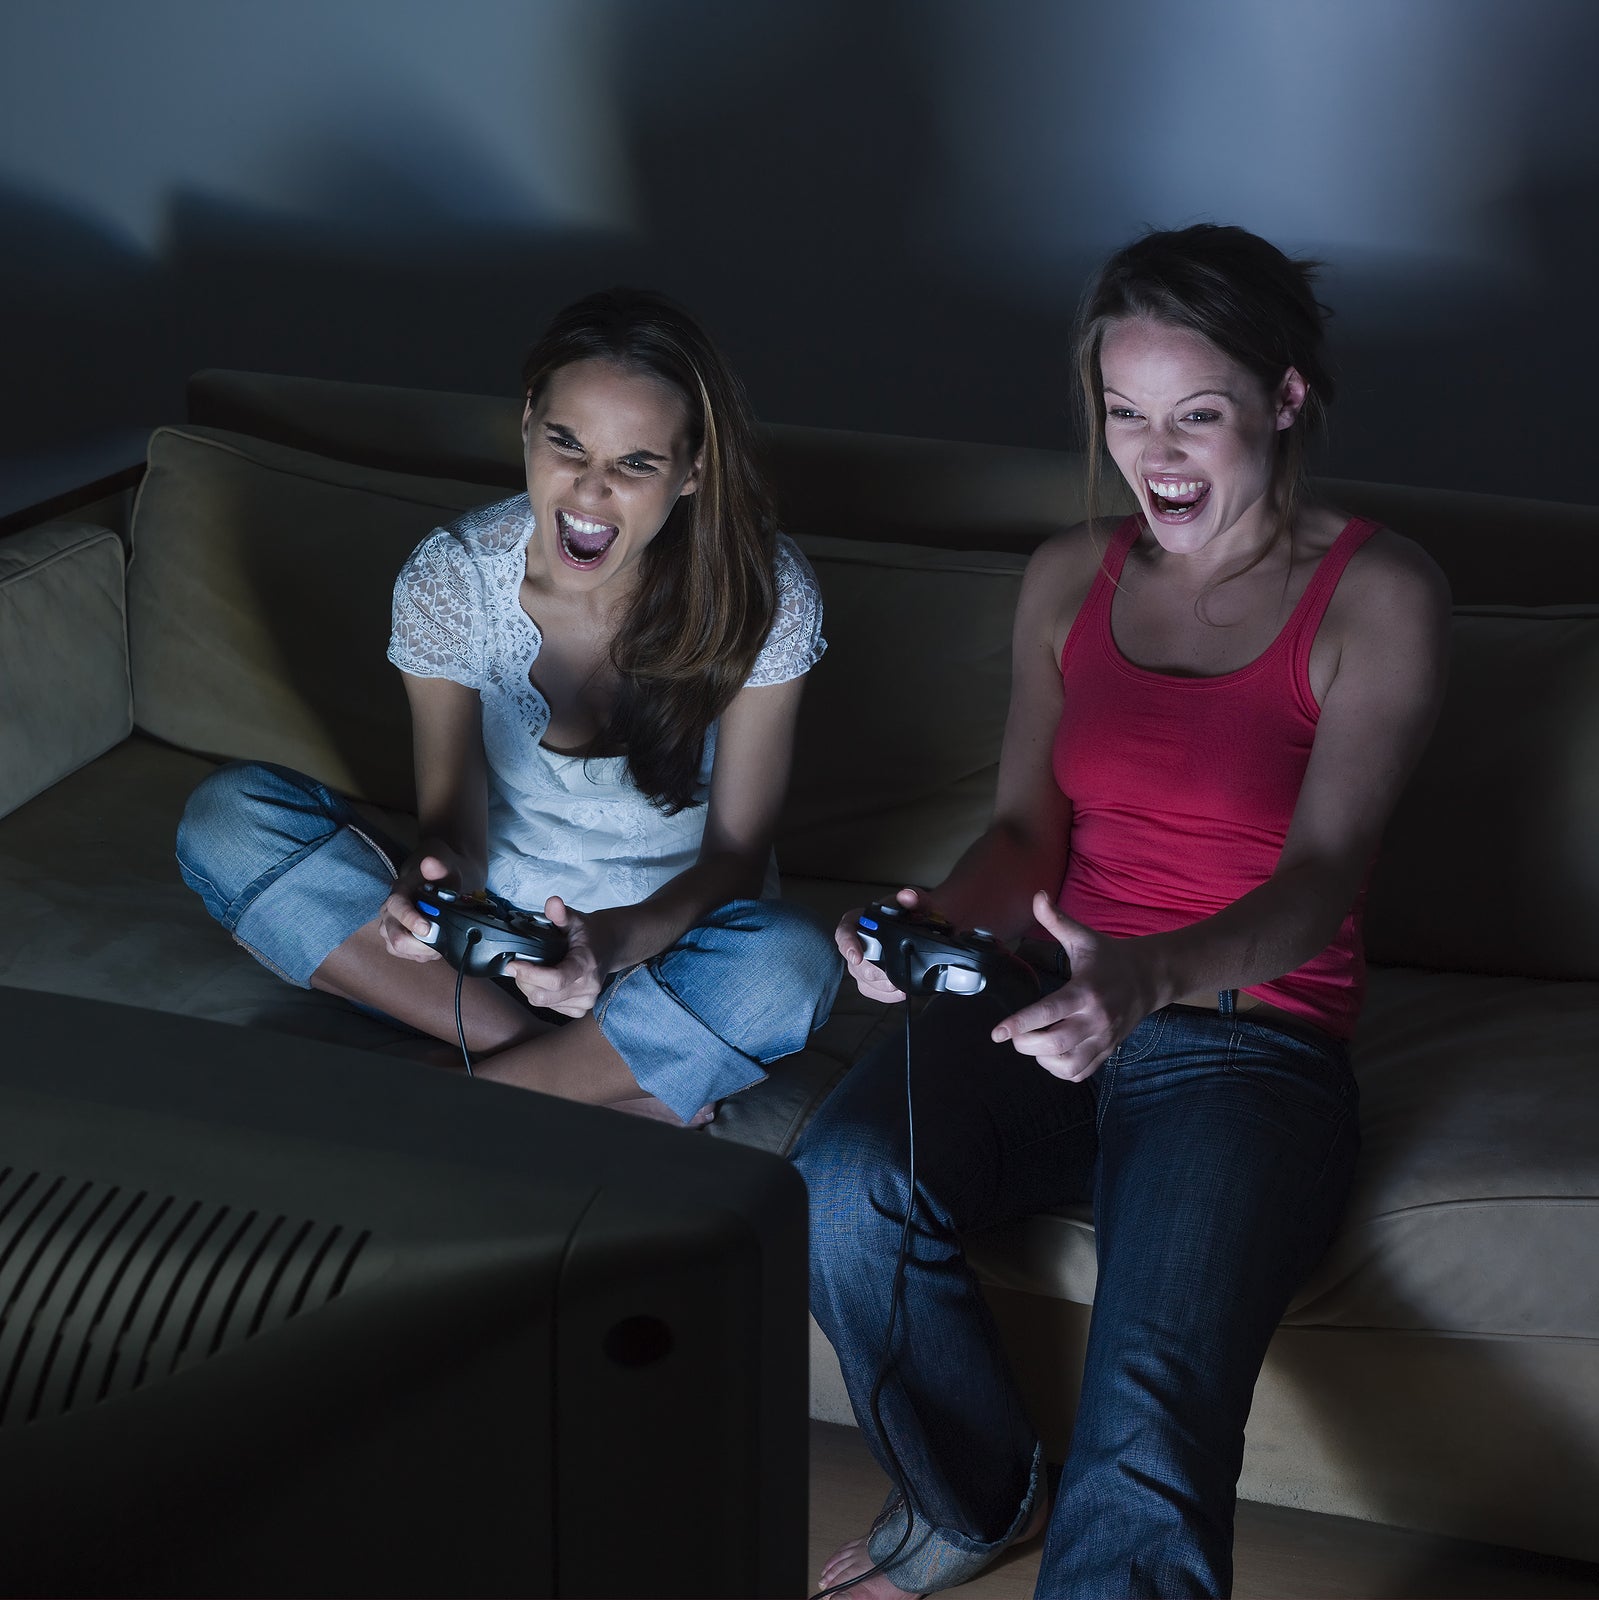 pictures in a living room of two young girls sitting on a couch playing video game